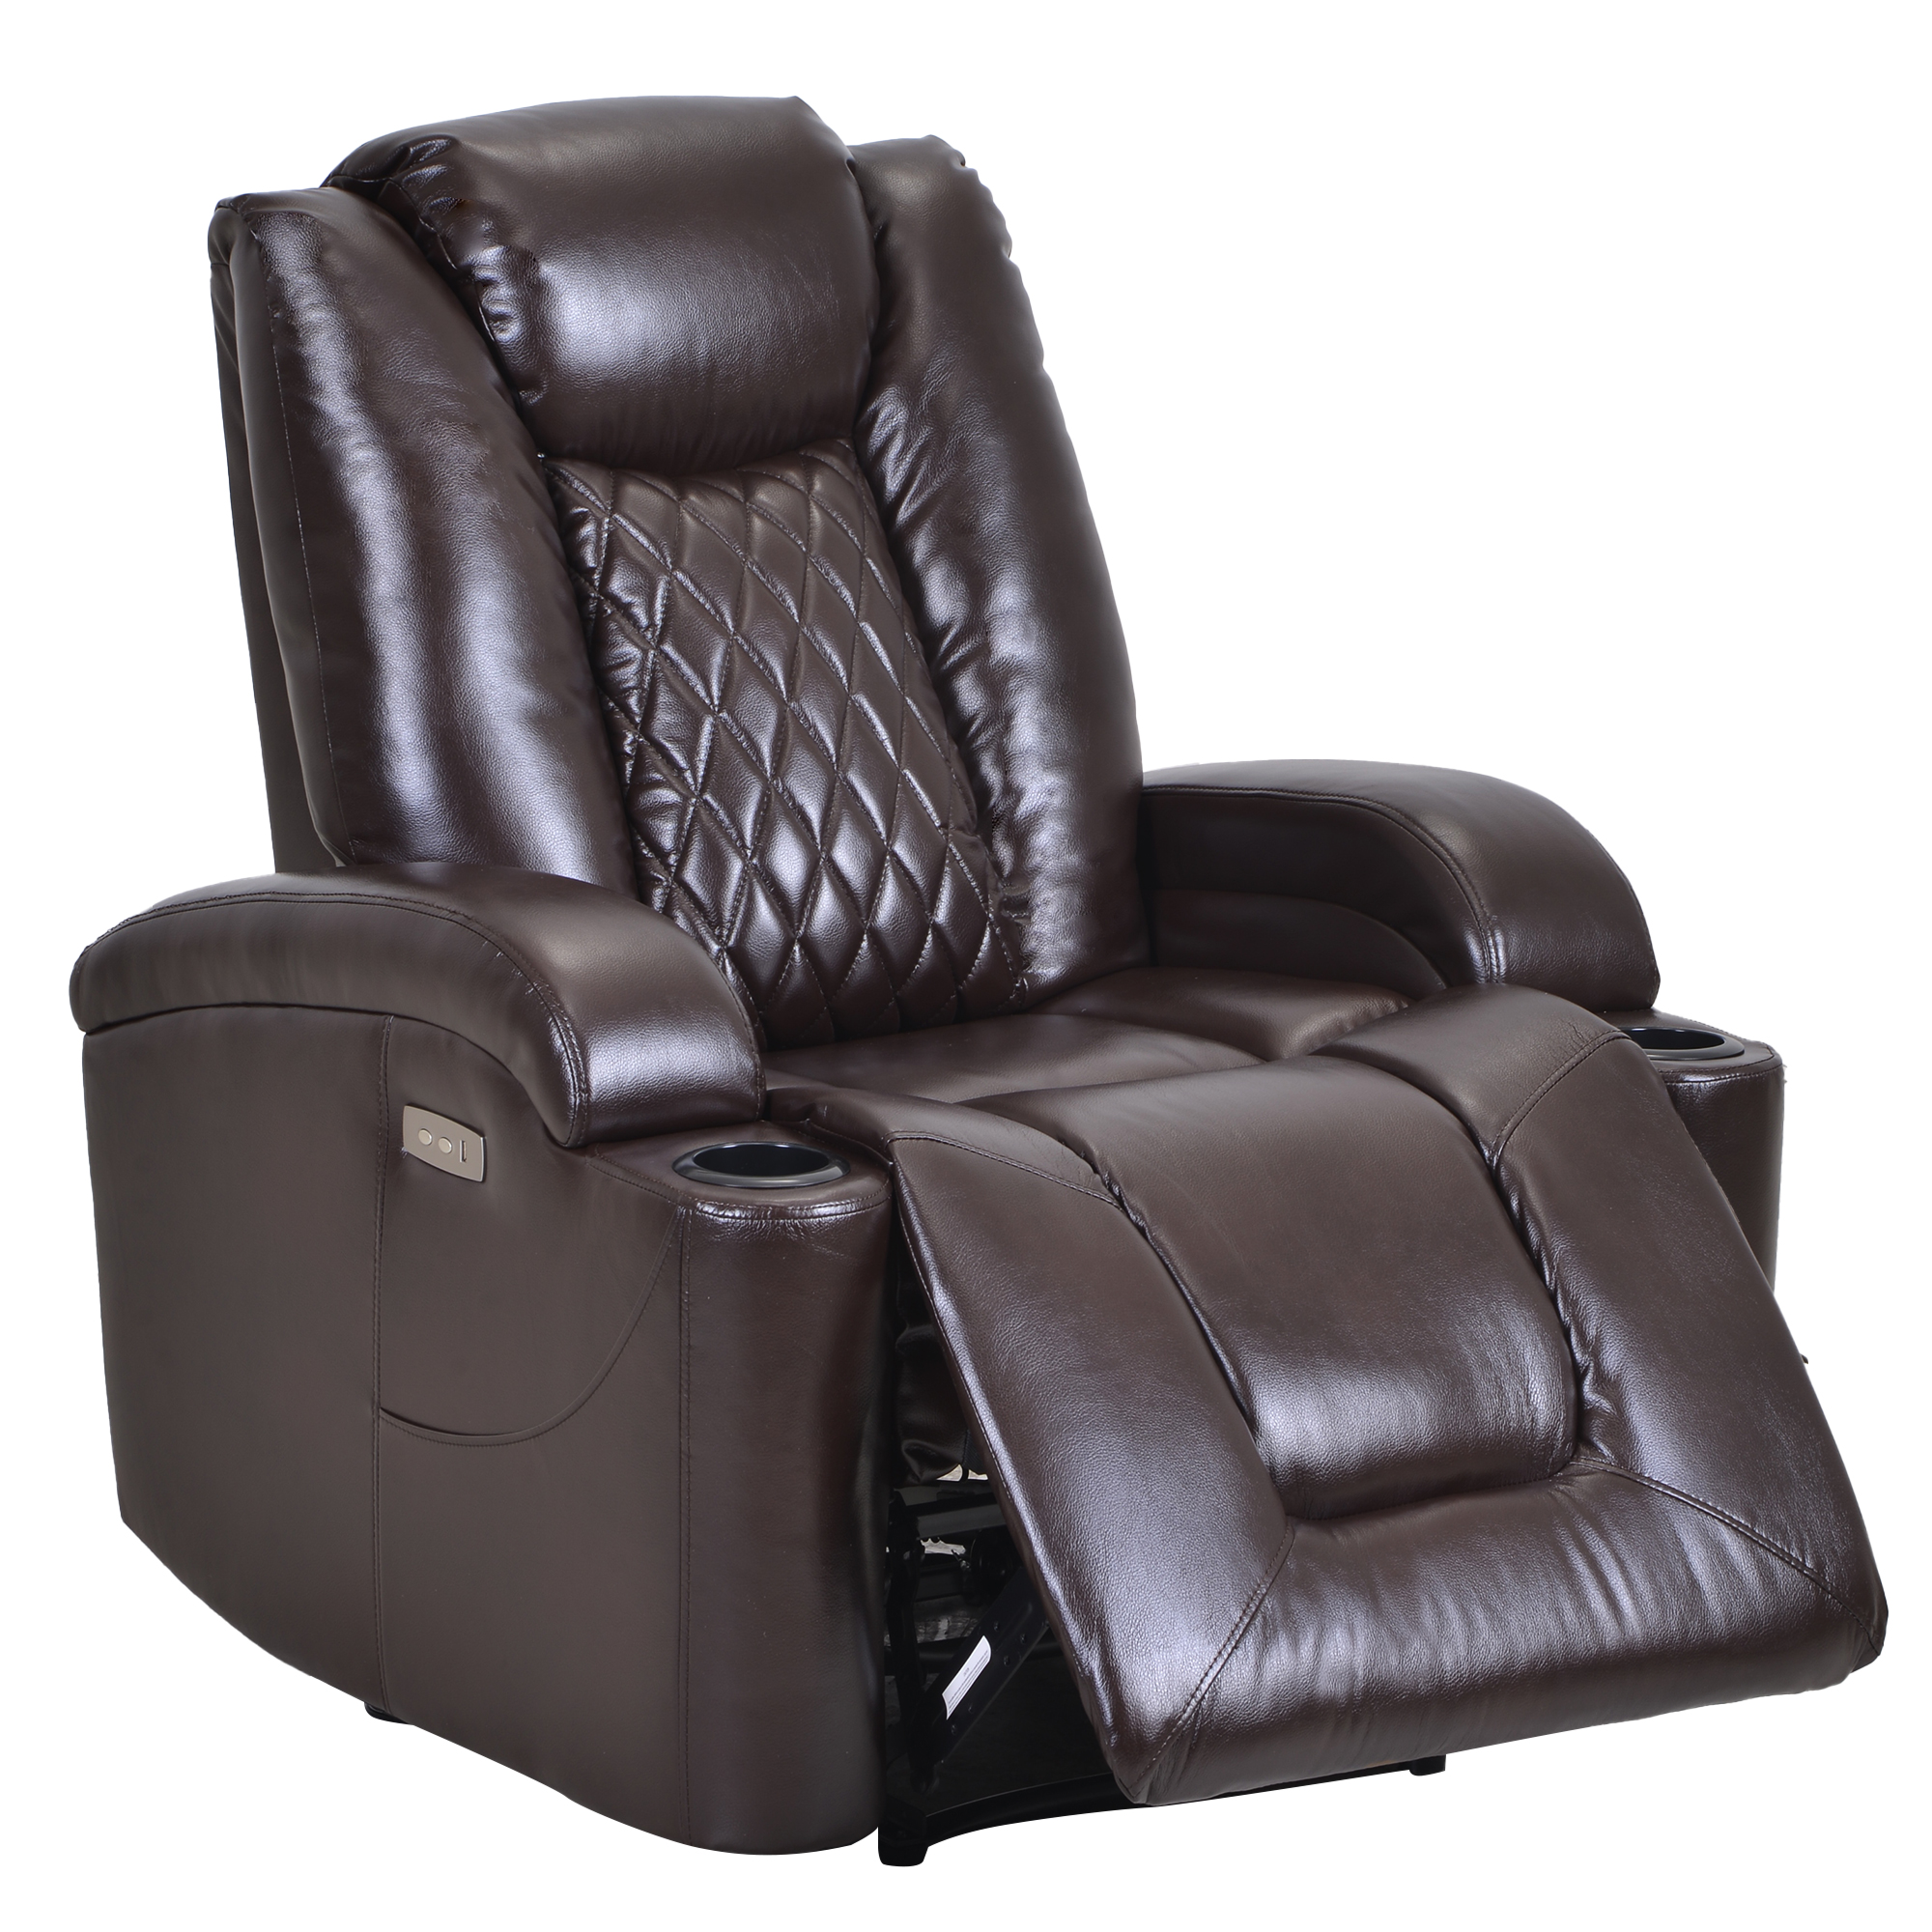 Home Theater Seating With USB Charge Port and Cup Holder-Trysauna